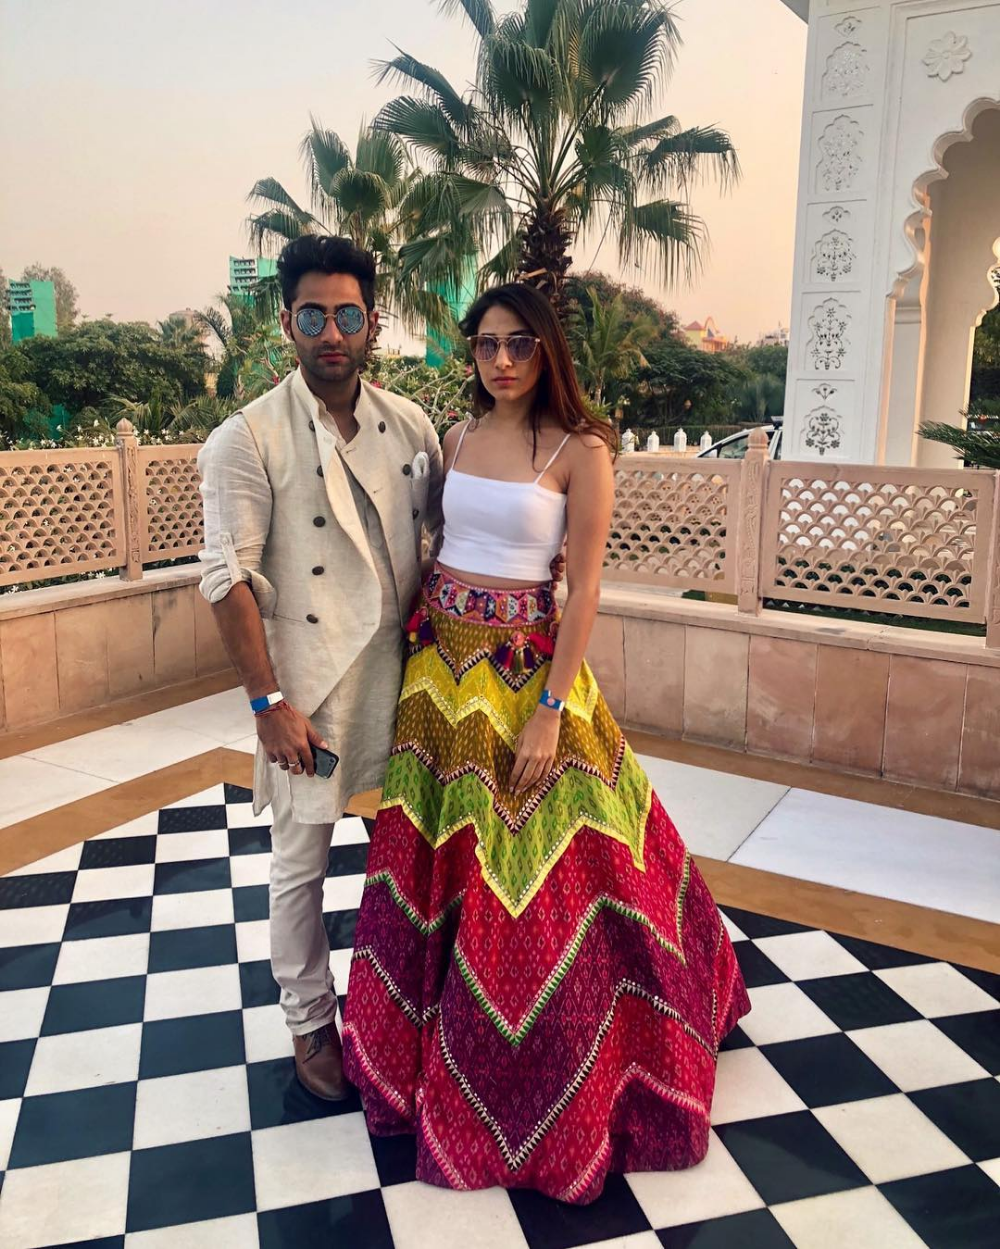 Armaan Jain Girlfriend Age Boyfriend Husband Family Affairs Net Worth Unknown Facts Profession Wiki Wikipedia Anissa Malhotra Boyfriend Biography Early Life Personal Life Career Net Worthheight Weight Secrets Affairs Images Marriage Armaan jain latest information and updates: armaan jain girlfriend age boyfriend